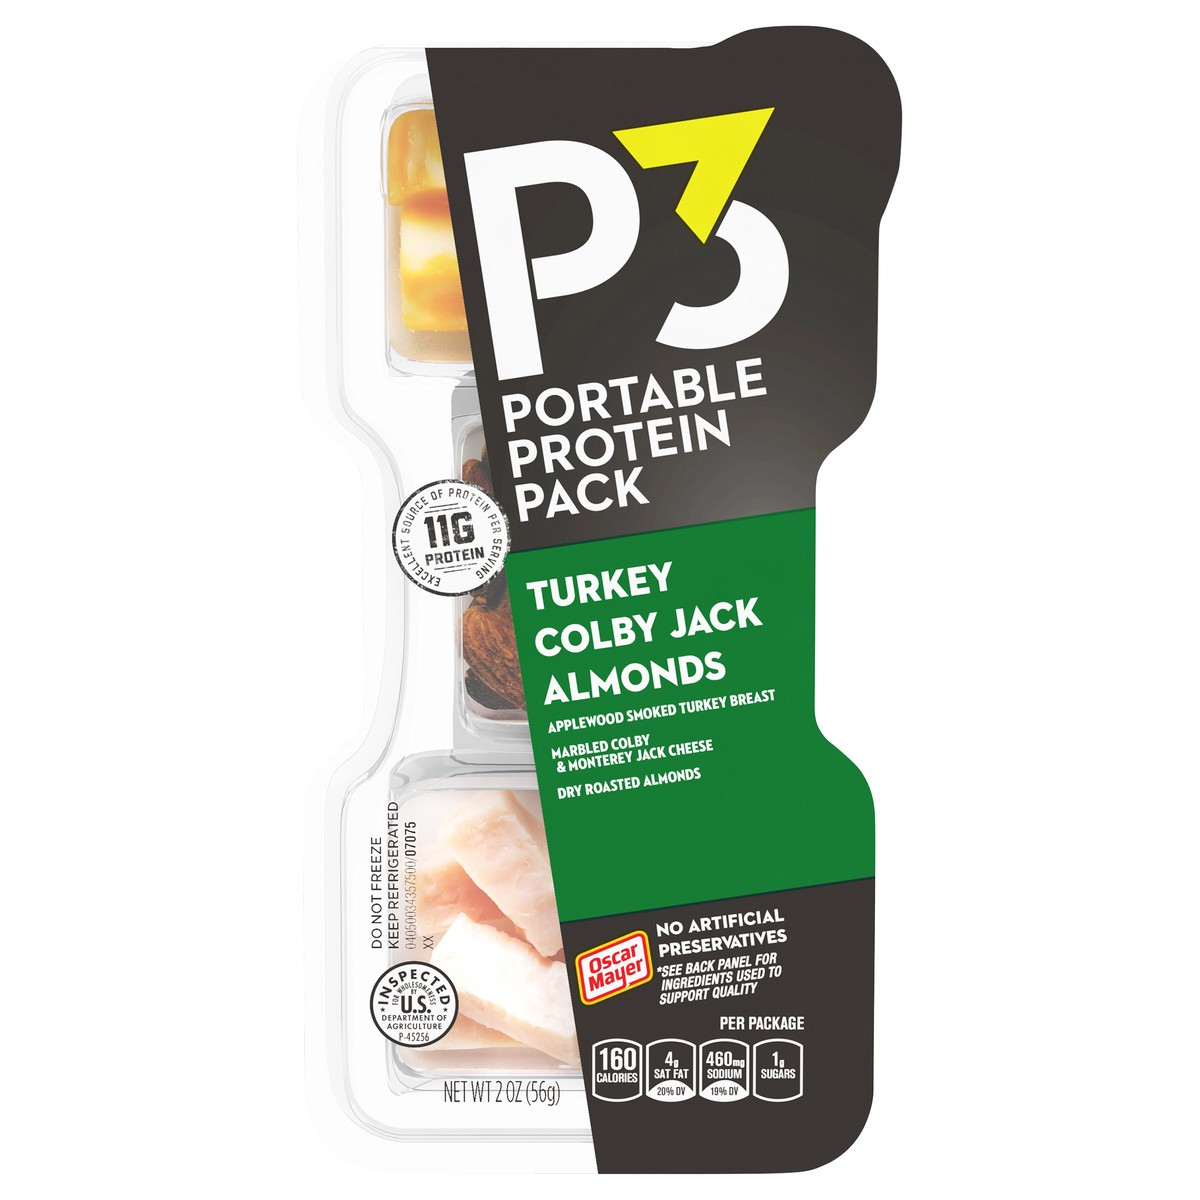 slide 1 of 9, P3 Portable Protein Pack Turkey, Almonds Colby Jack Cheese, for a Low Carb Lifestyle, 2 oz Tray, 2 oz